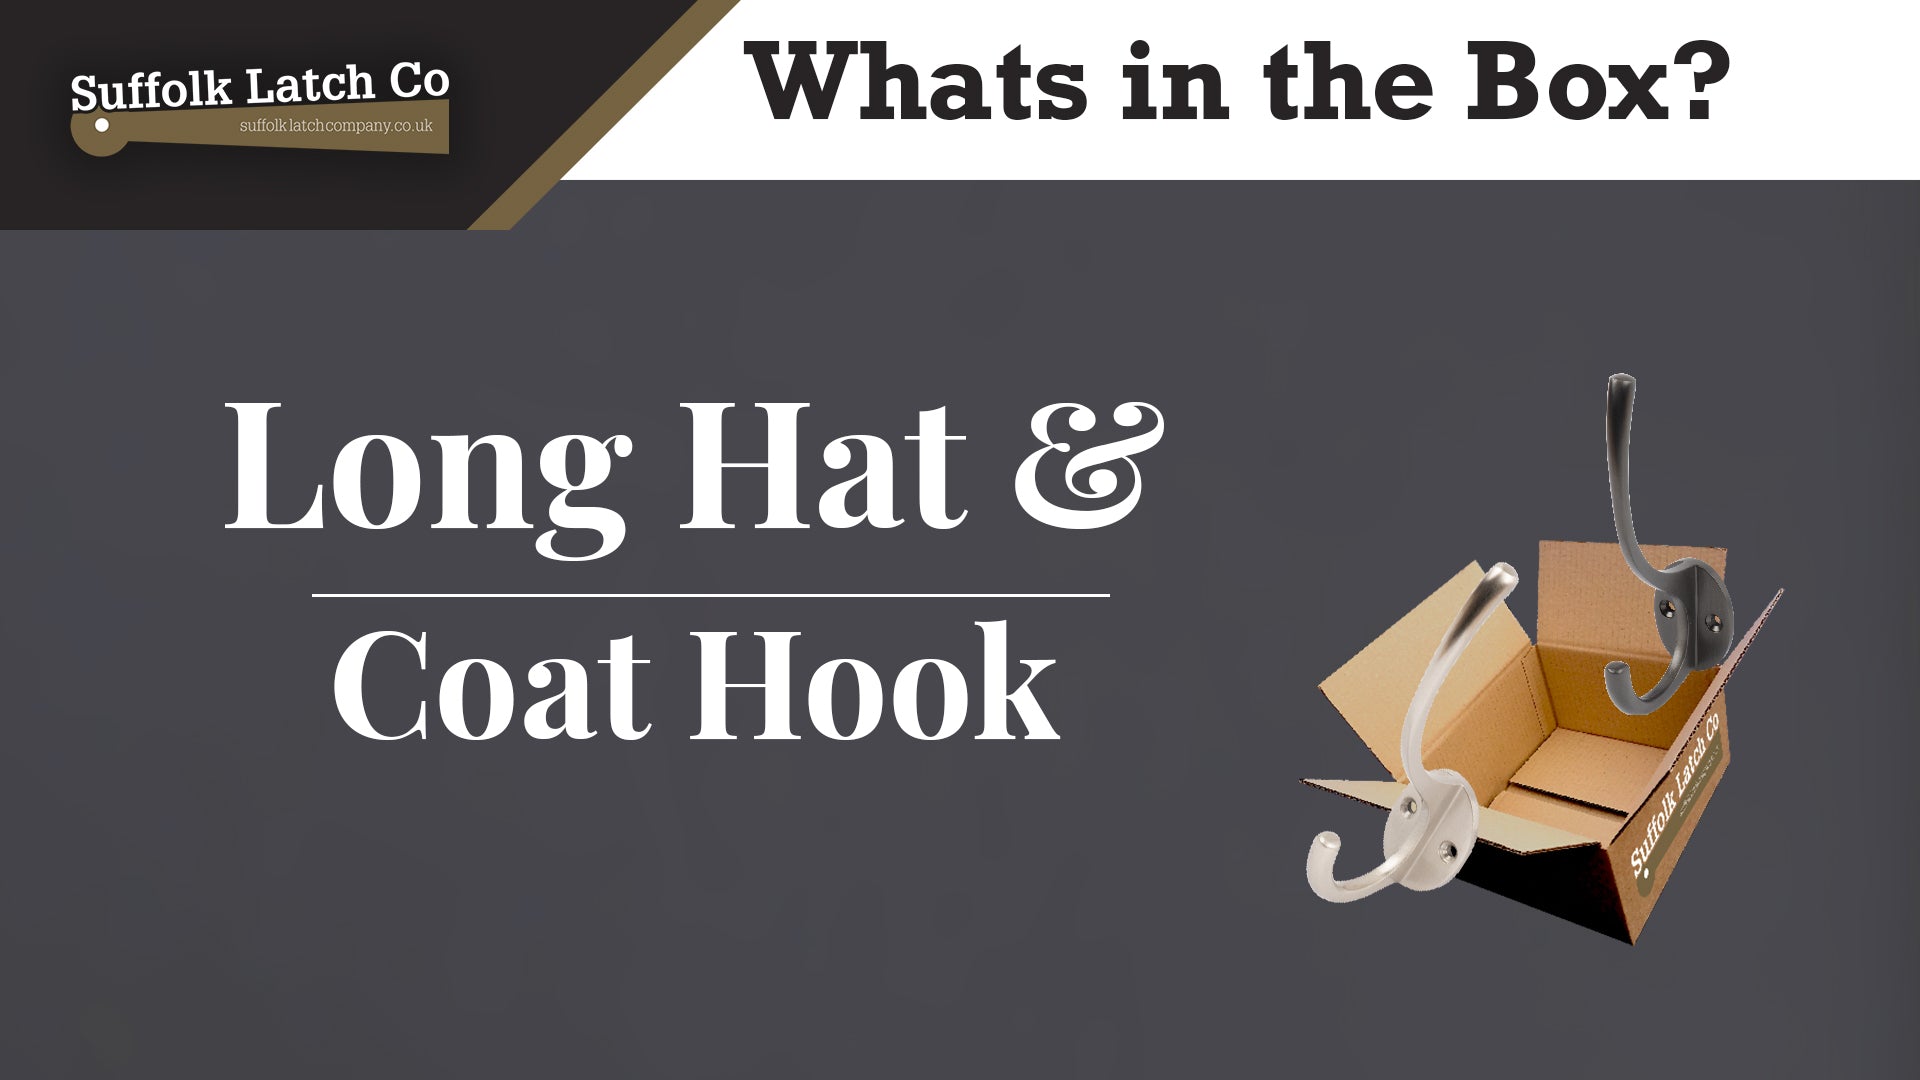 What's in the Box: Long Hat & Coat Hook